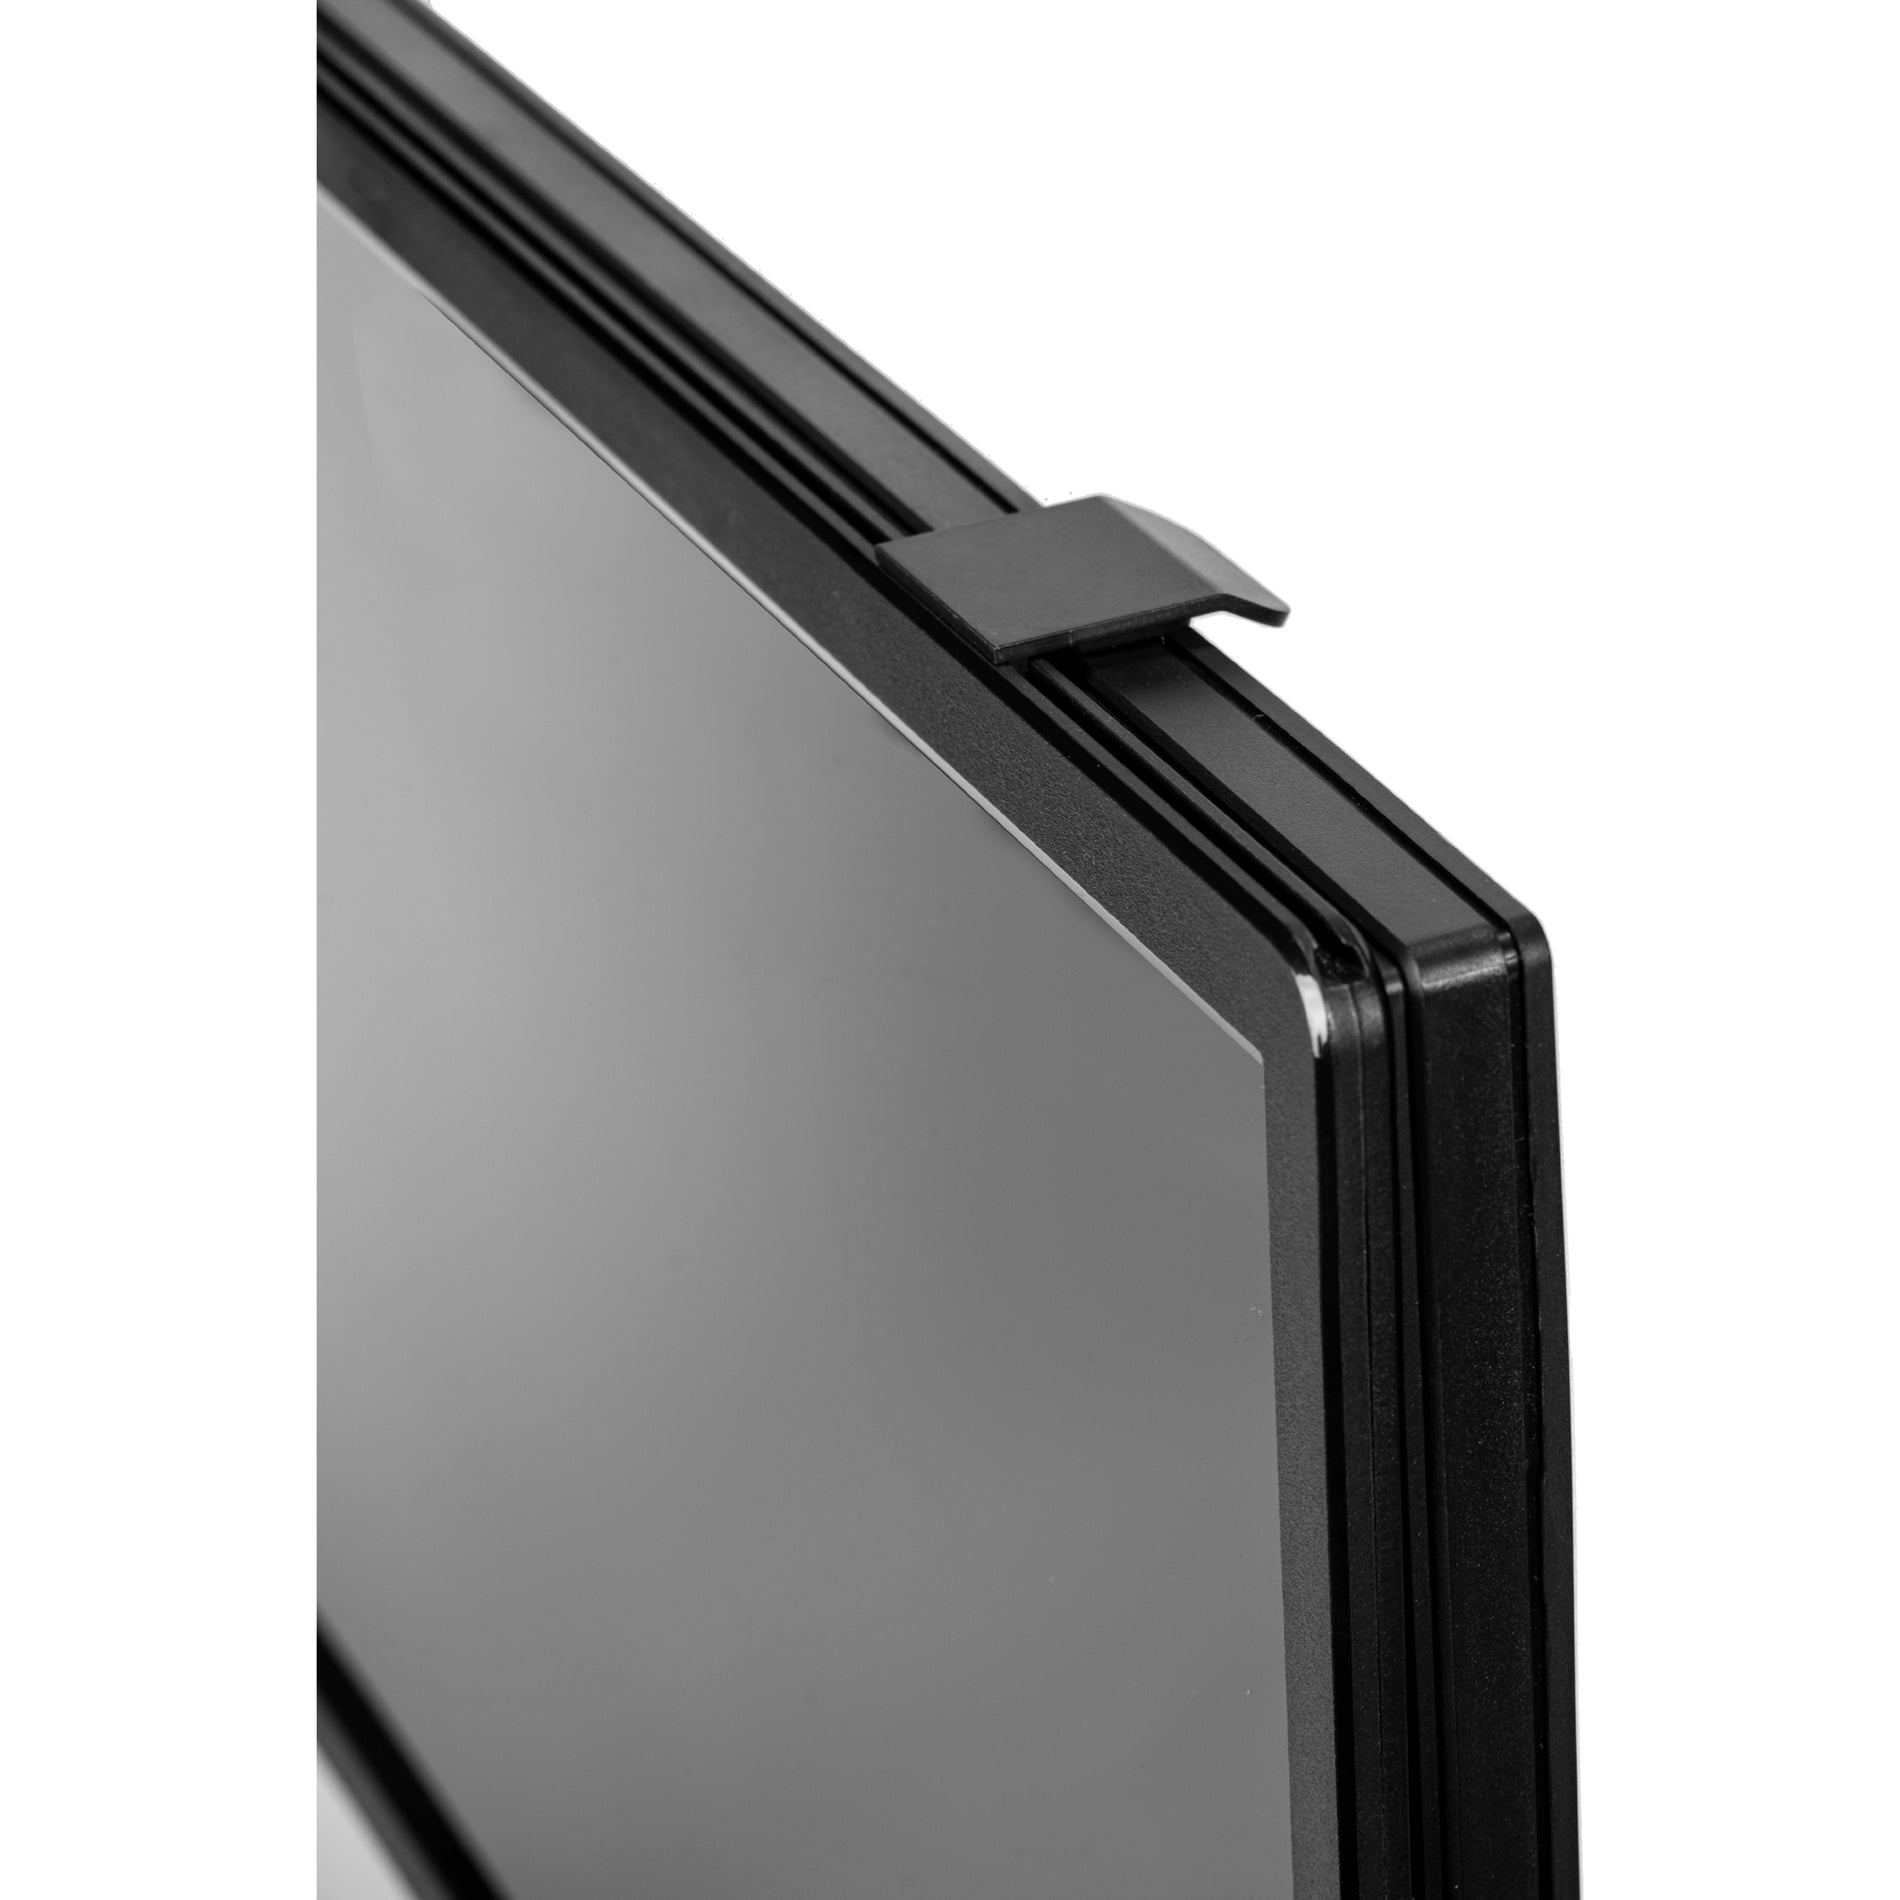 Rocstor PV0026-B1 PrivacyView Privacy Screen Filter, 22in Widescreen, Anti-glare, Easy to Apply, Black